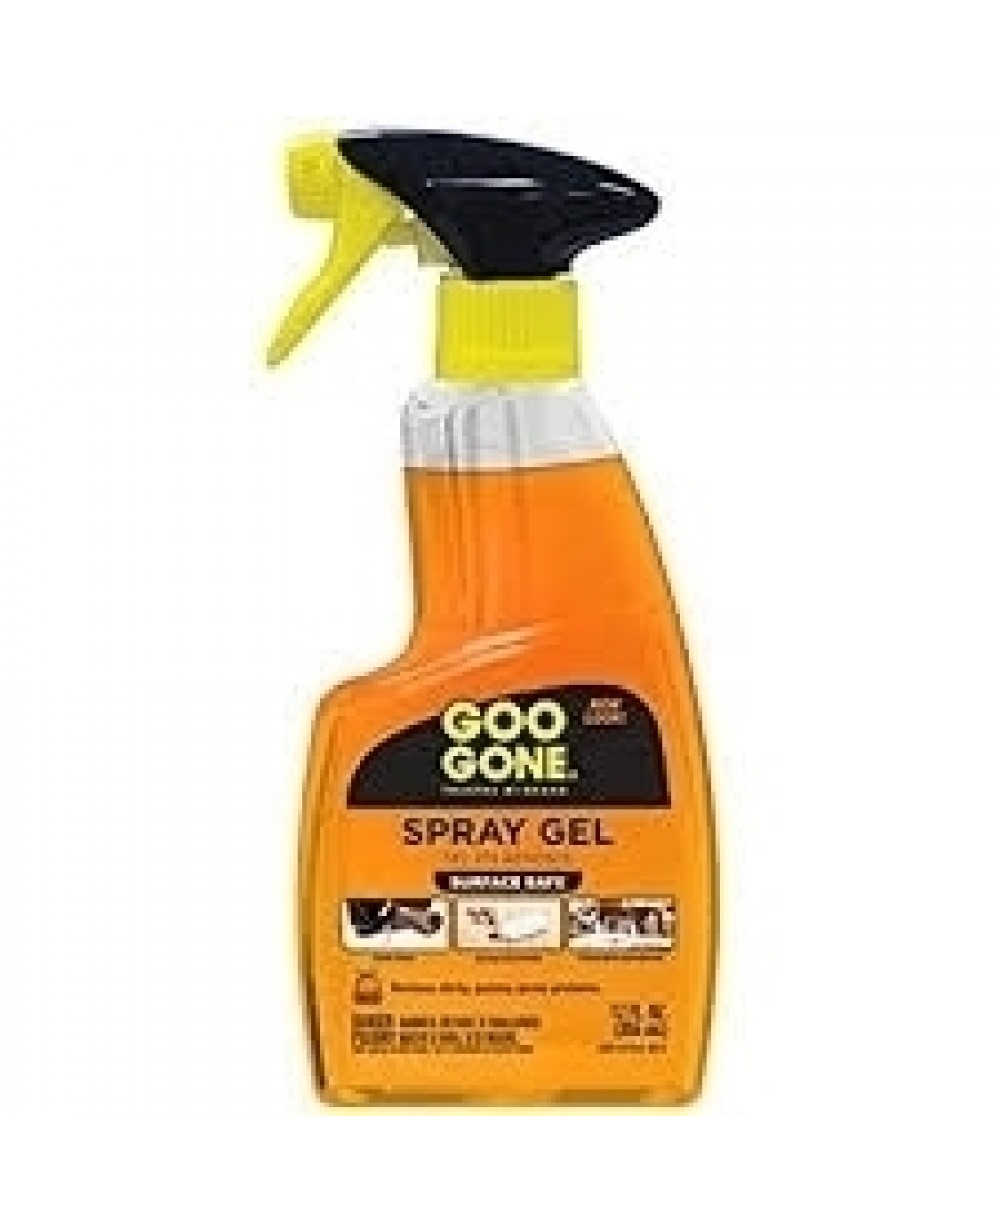 GOO GONE SPRAY GEL, 12OZ, GGHS12 Adhesive Remover and cleaner, removes  stickers